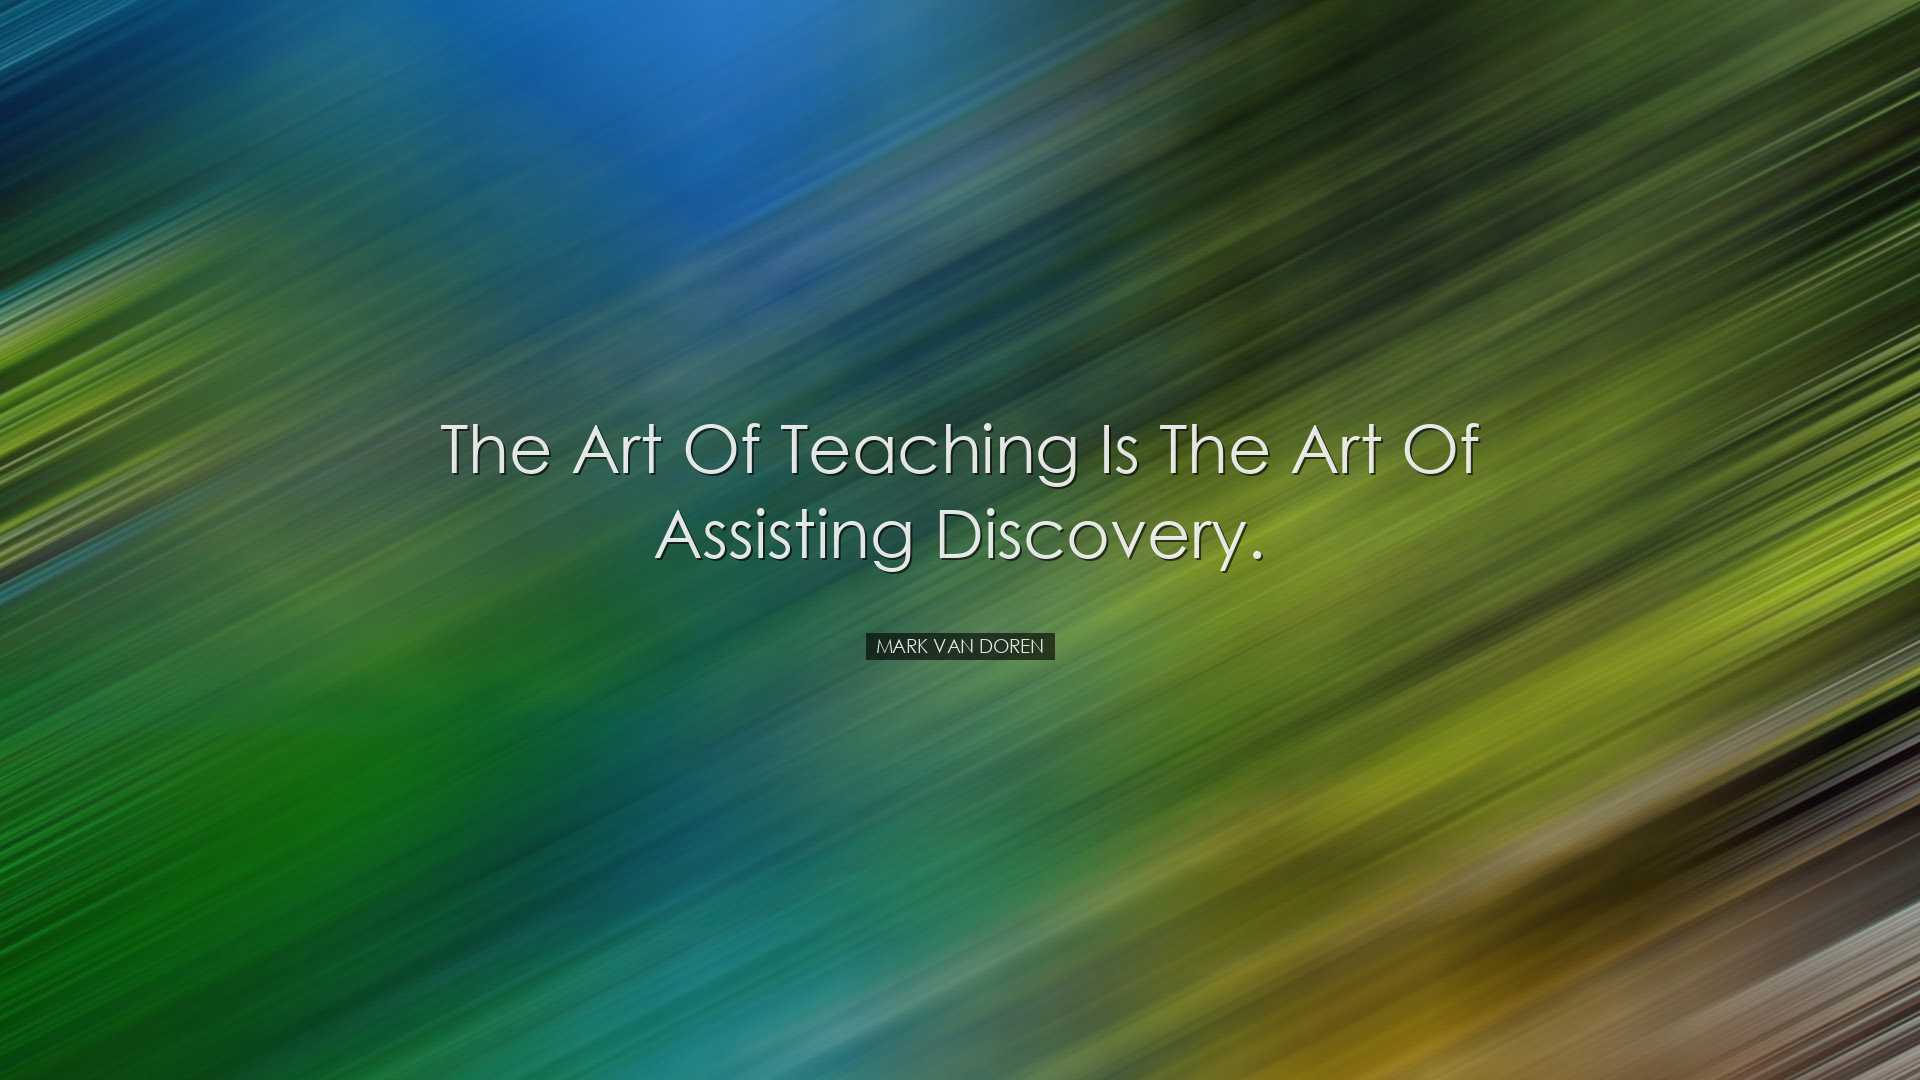 The art of teaching is the art of assisting discovery. - Mark Van